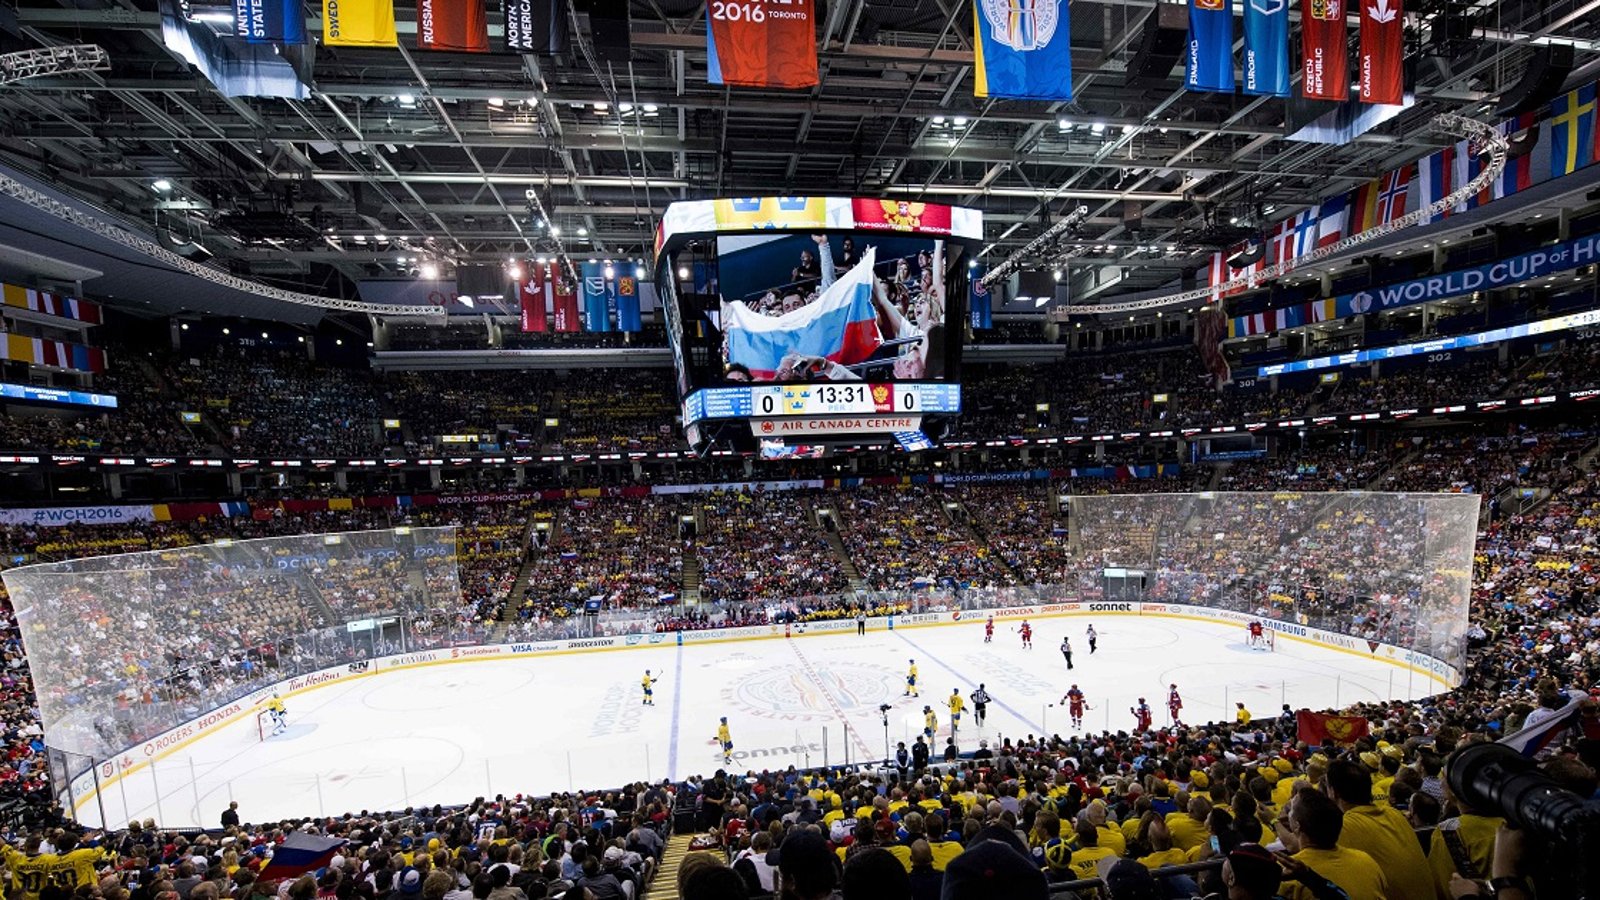 Rumor: NHL has chosen its 2 “hub cities” for the 2020 Stanley Cup Playoffs.